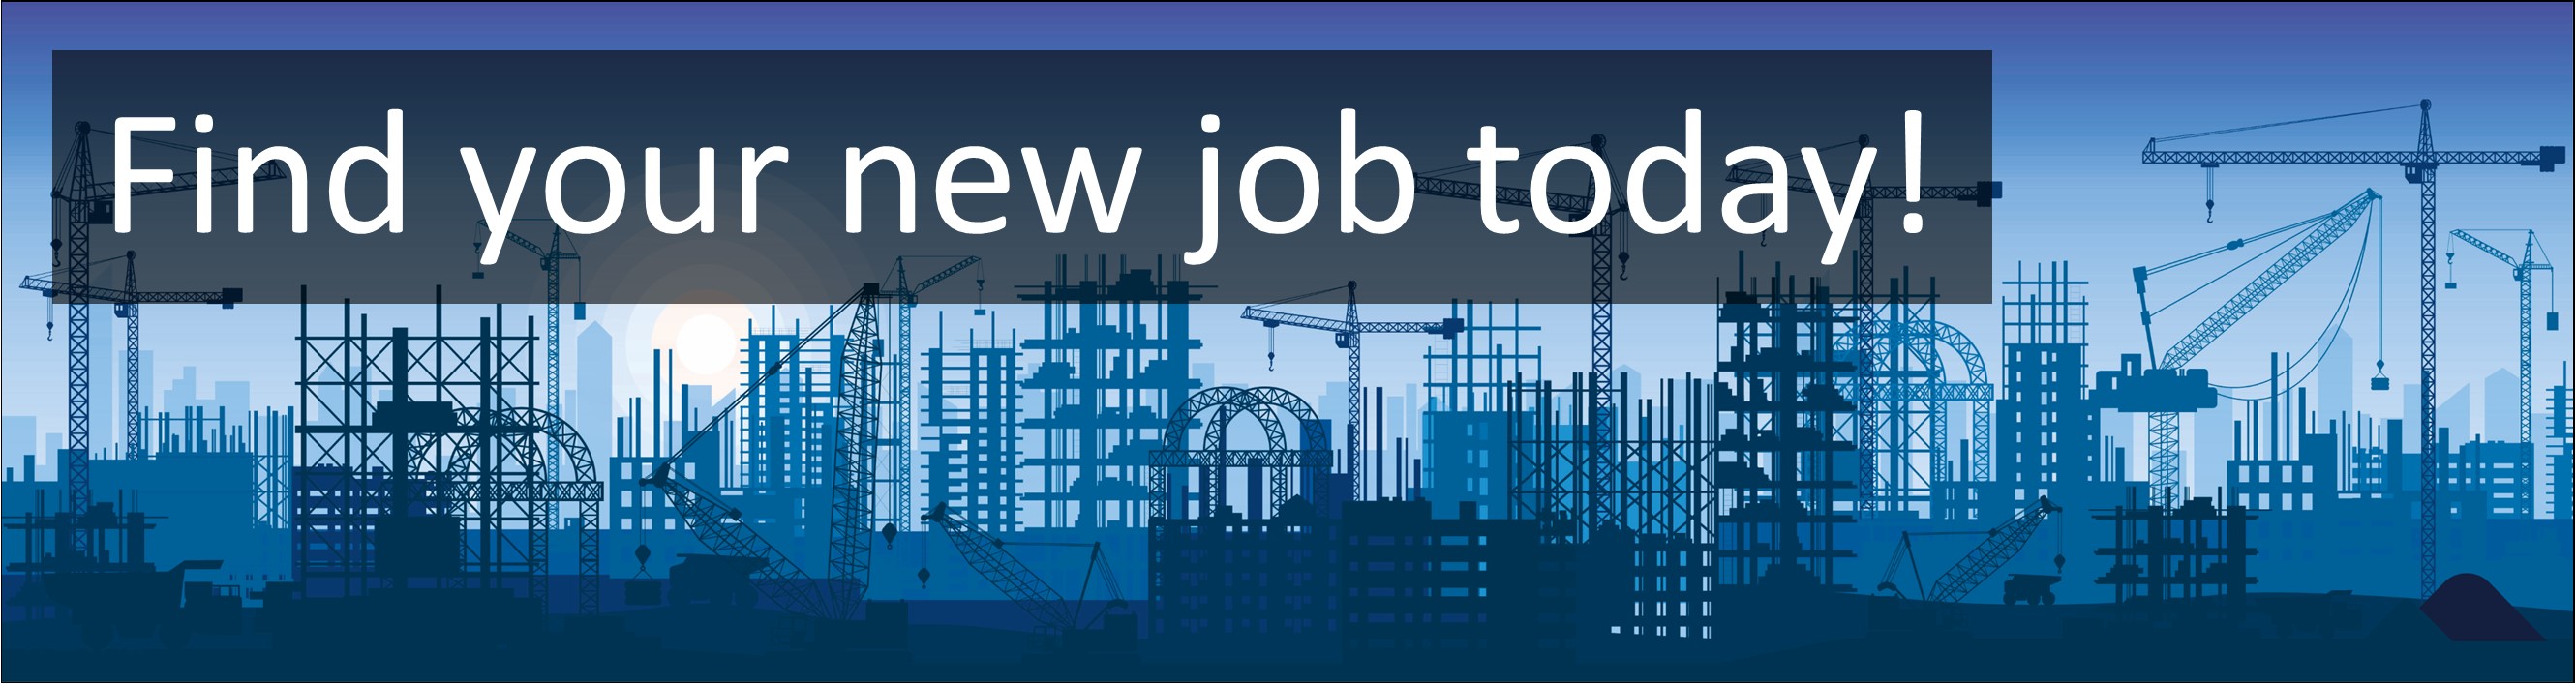 Construction & Trades Jobs. Miner / Tunnelling Operative Jobs, Careers & Vacancies in Plymouth, Devon Advertised by AWD online – Multi-Job Board Advertising and CV Sourcing Recruitment Services